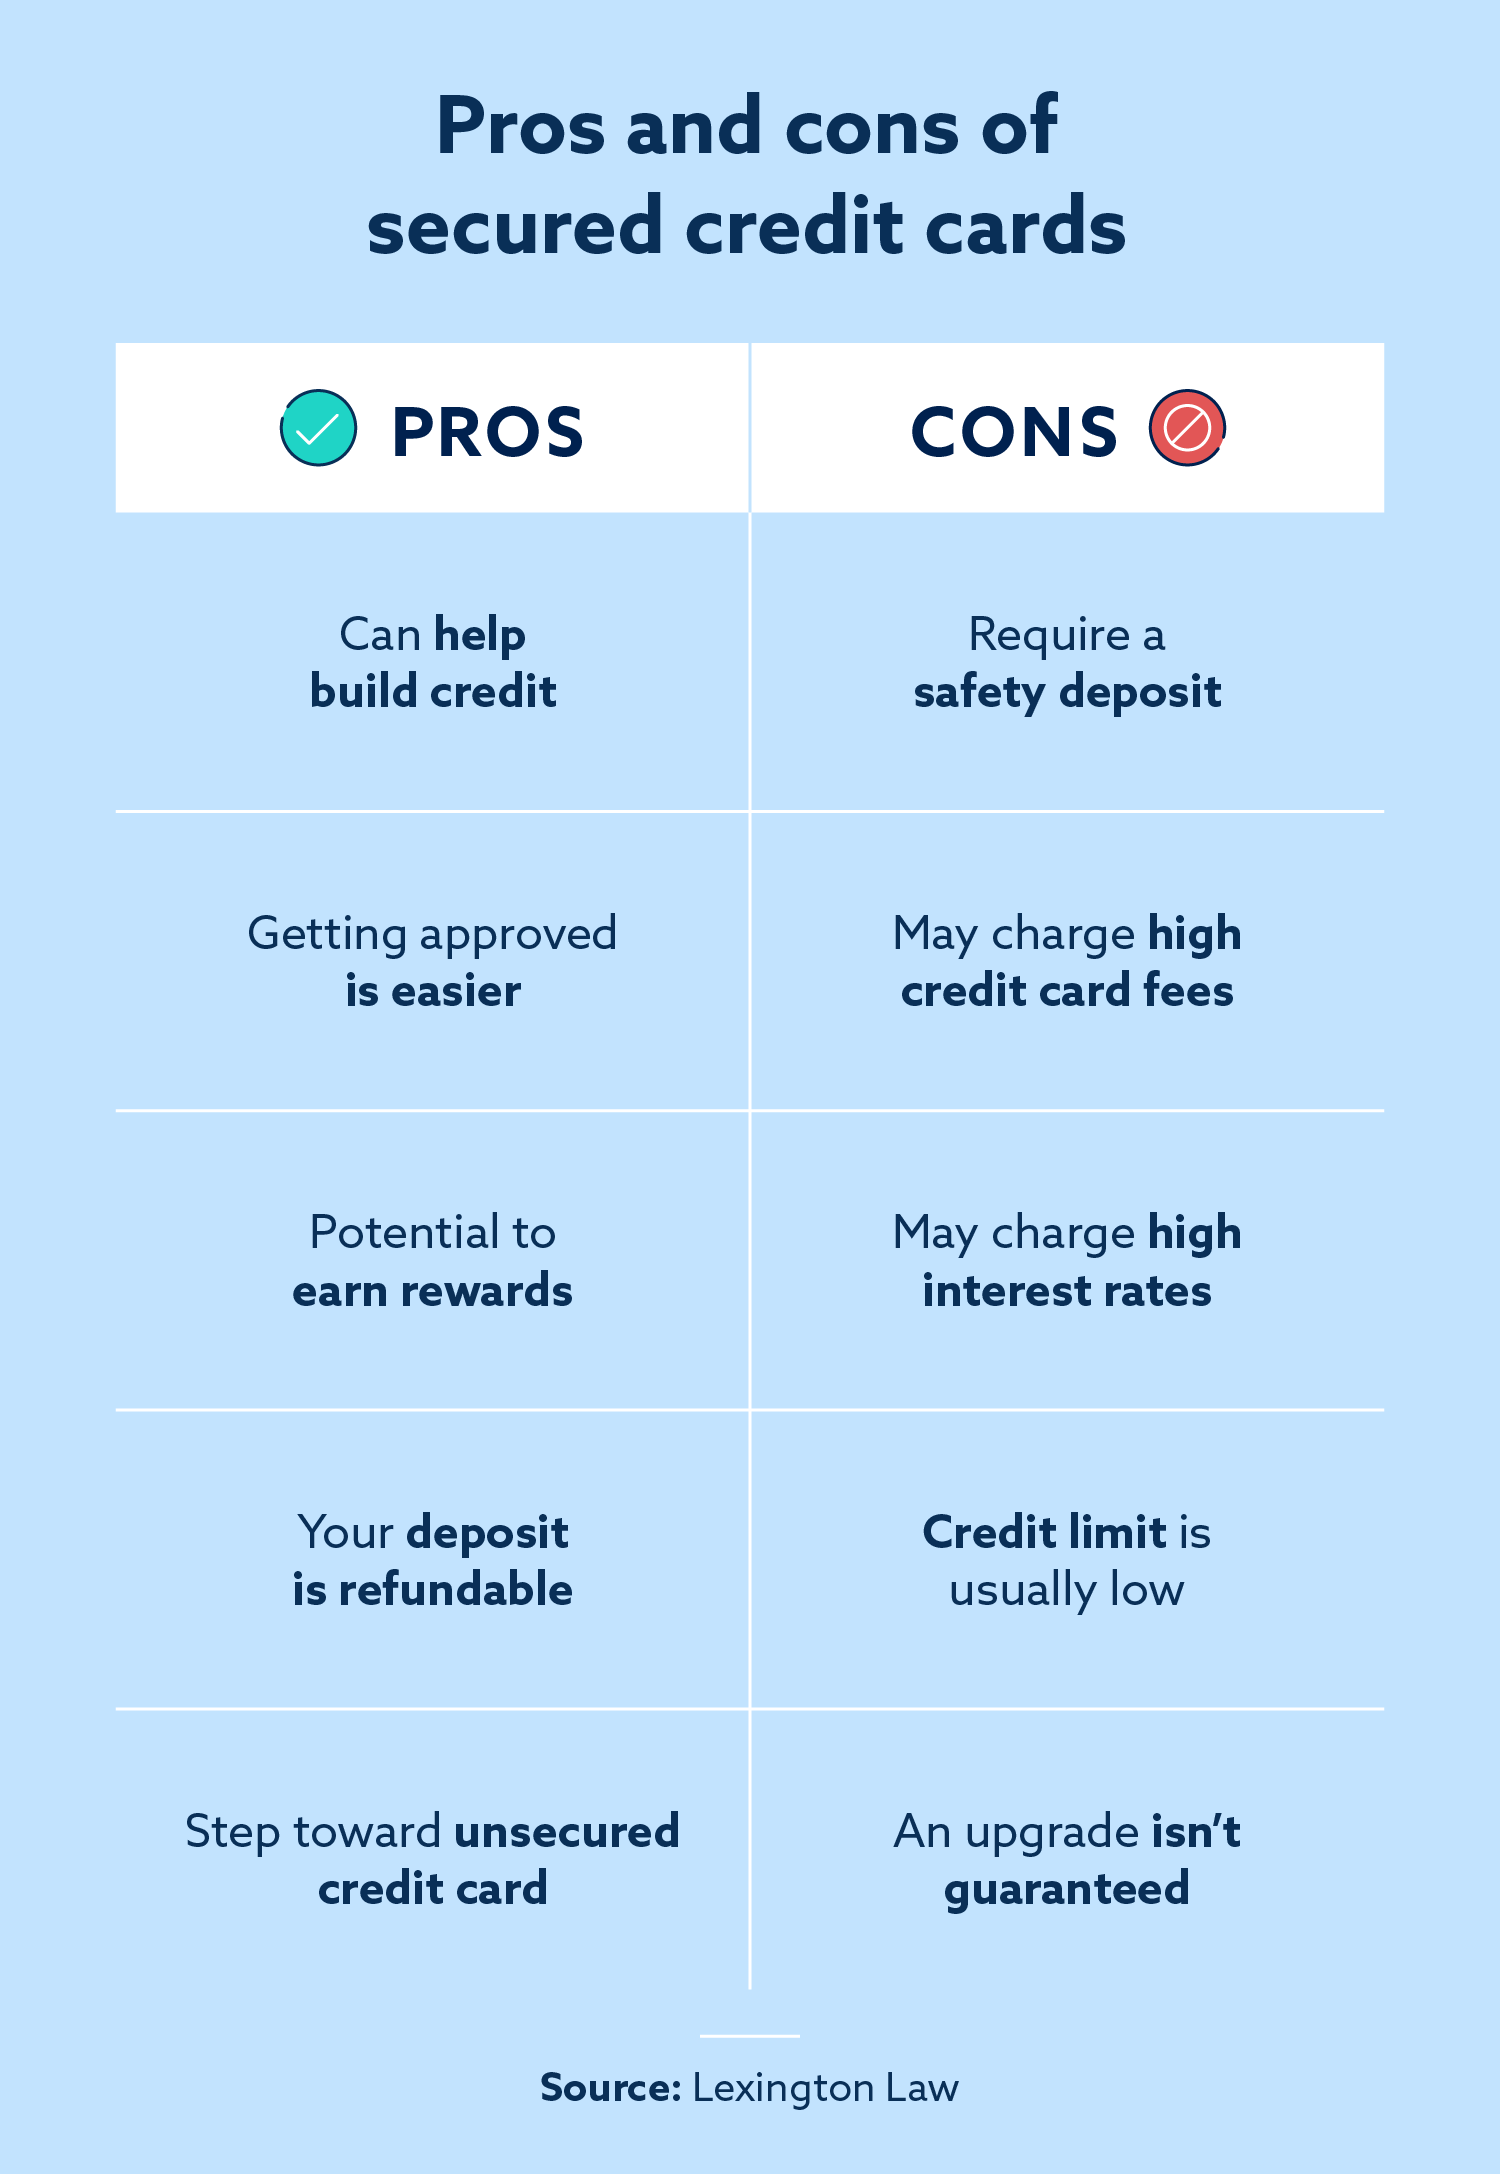 Pros and cons of secured credit cards.